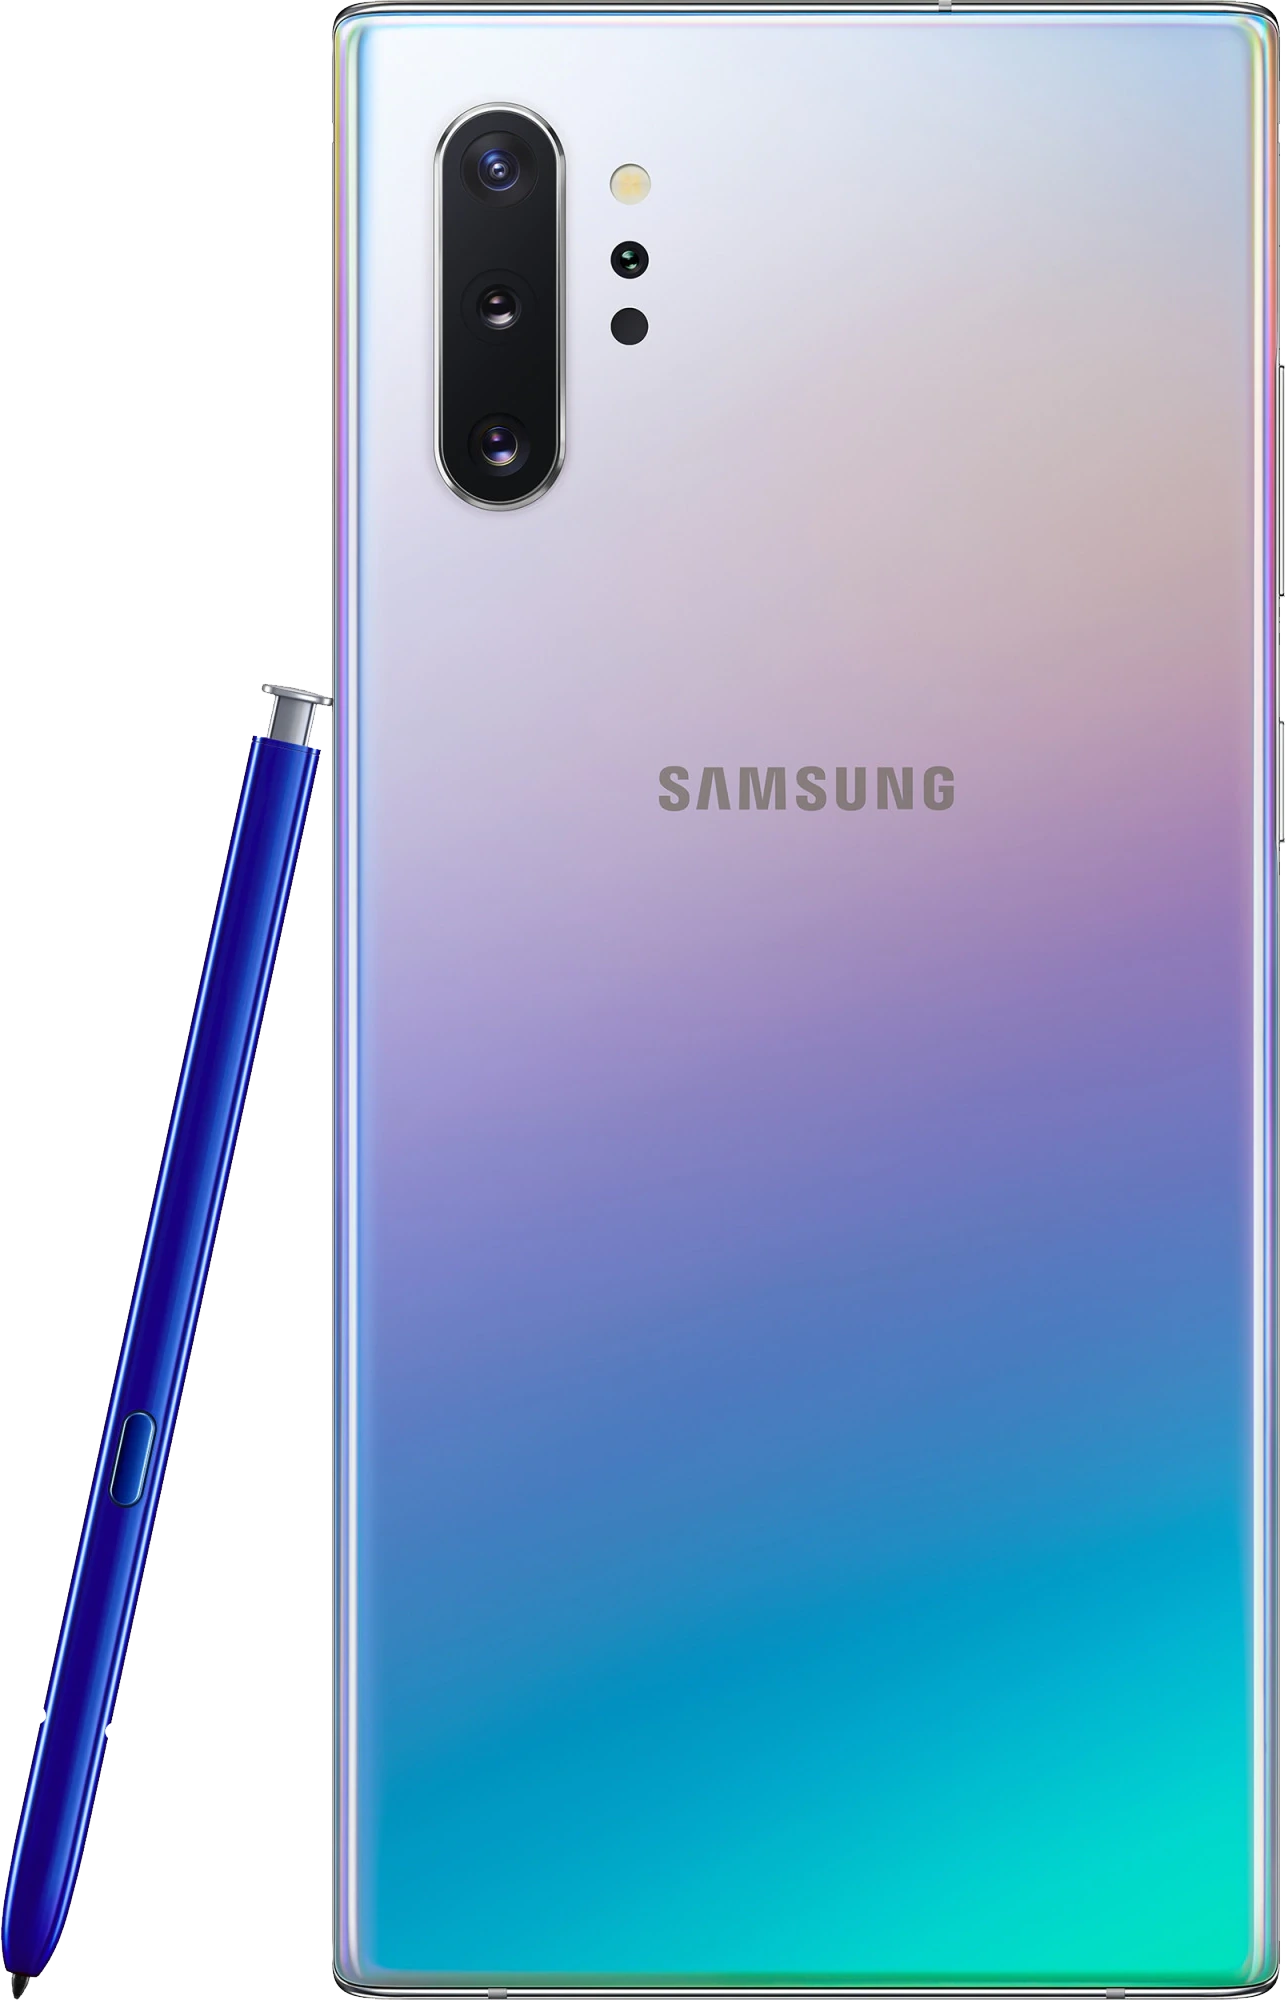 Samsung Galaxy Note 10 Plus: Symphony in Design and Function